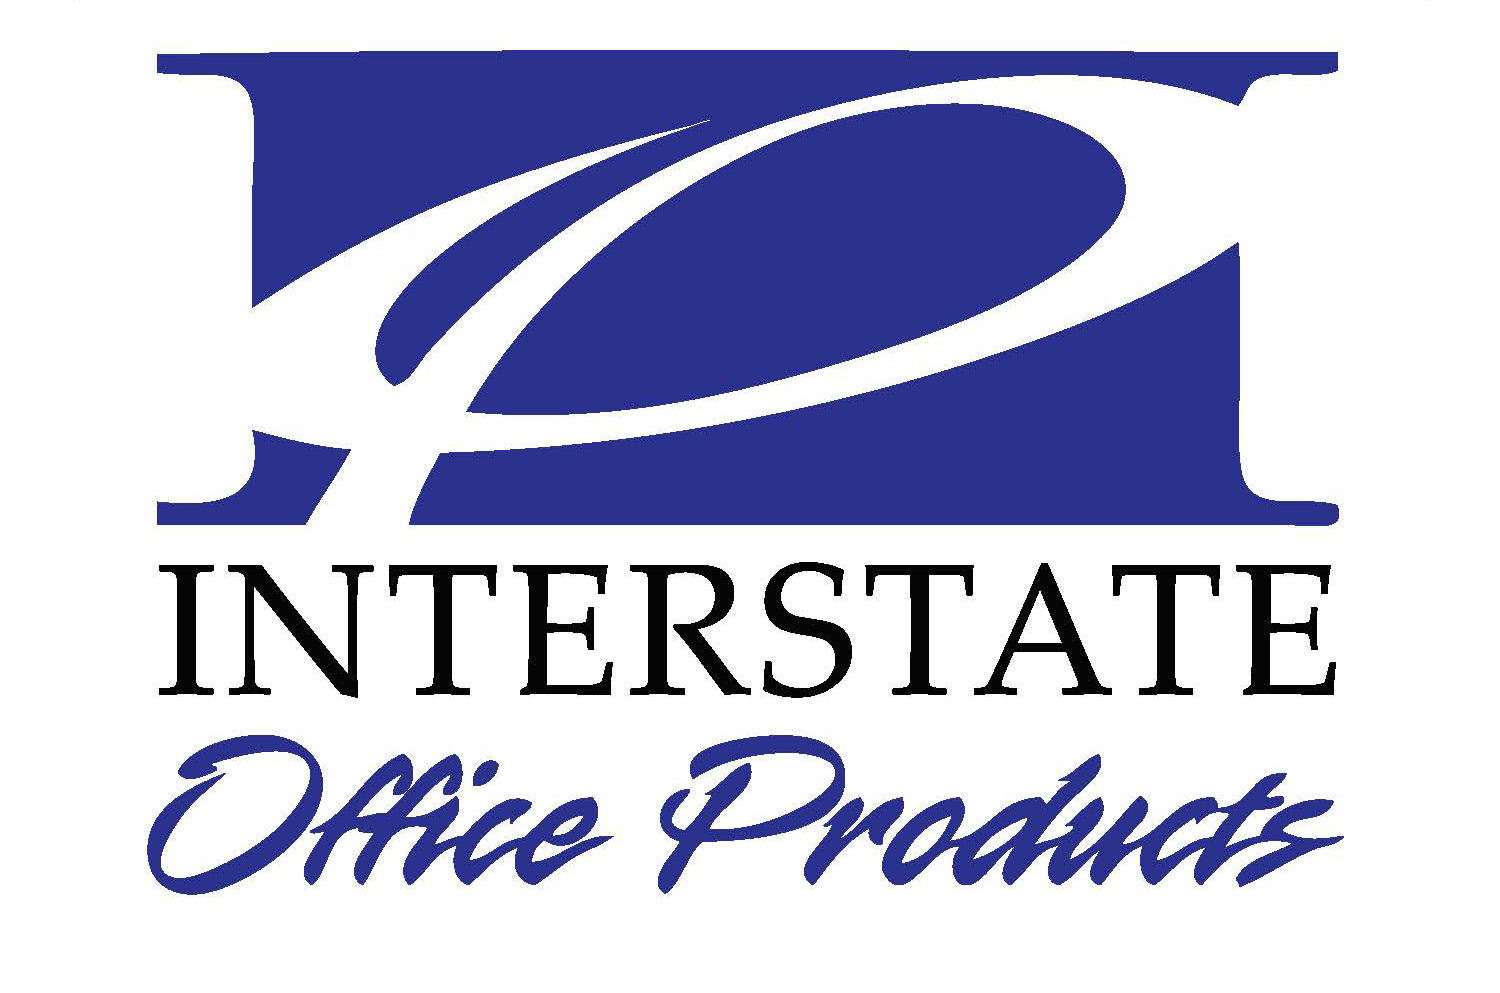 Interstate Office Products